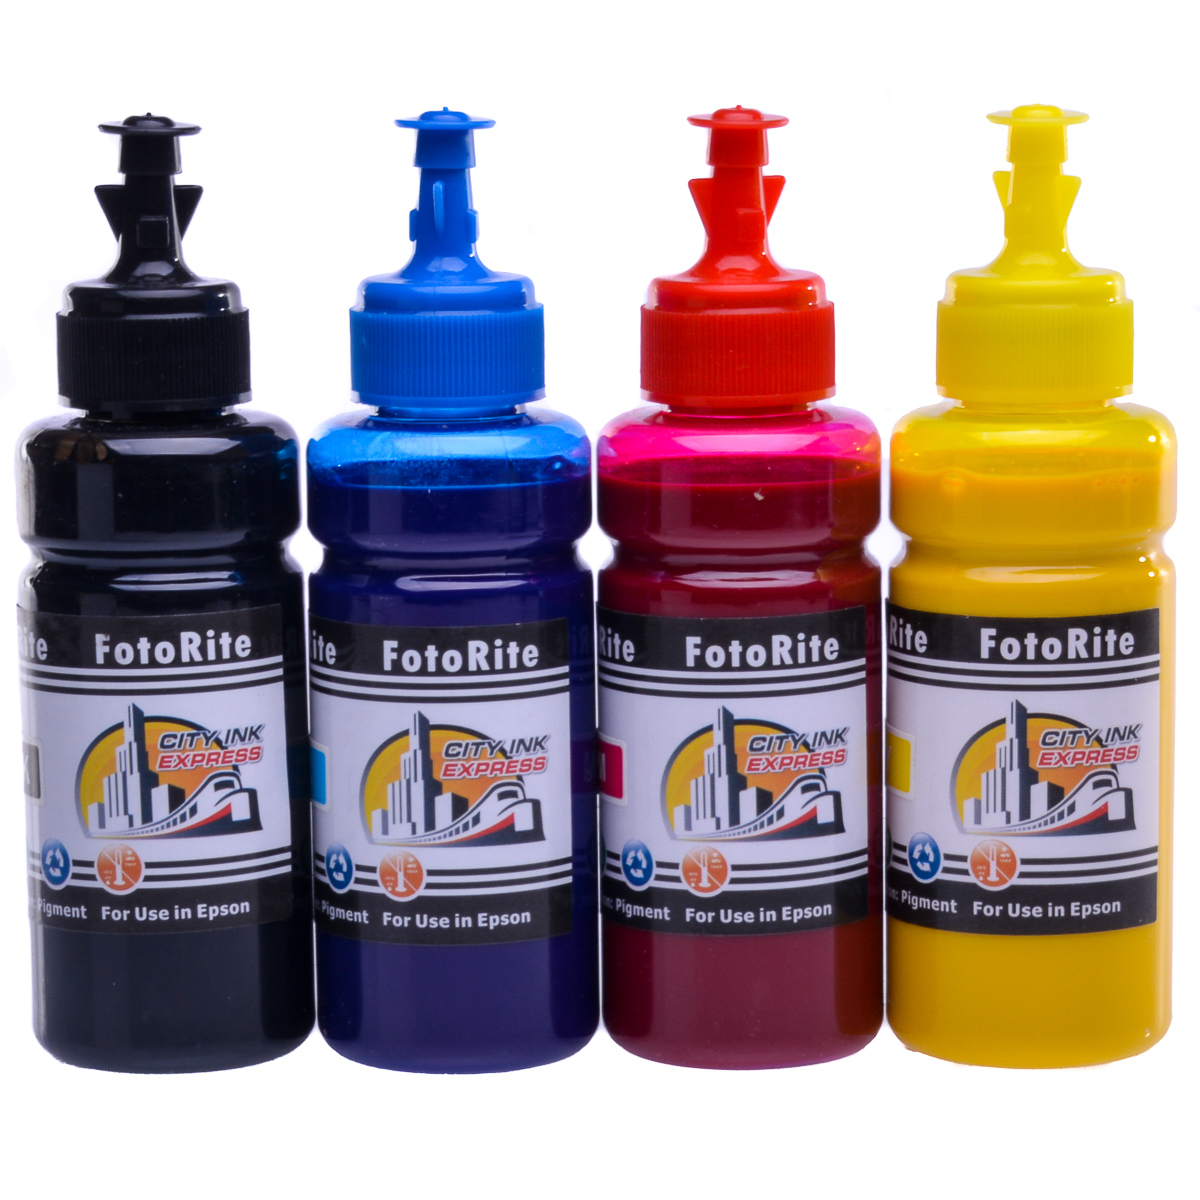 Cheap Multipack pigment ink refill replaces Epson WF-3830DWF